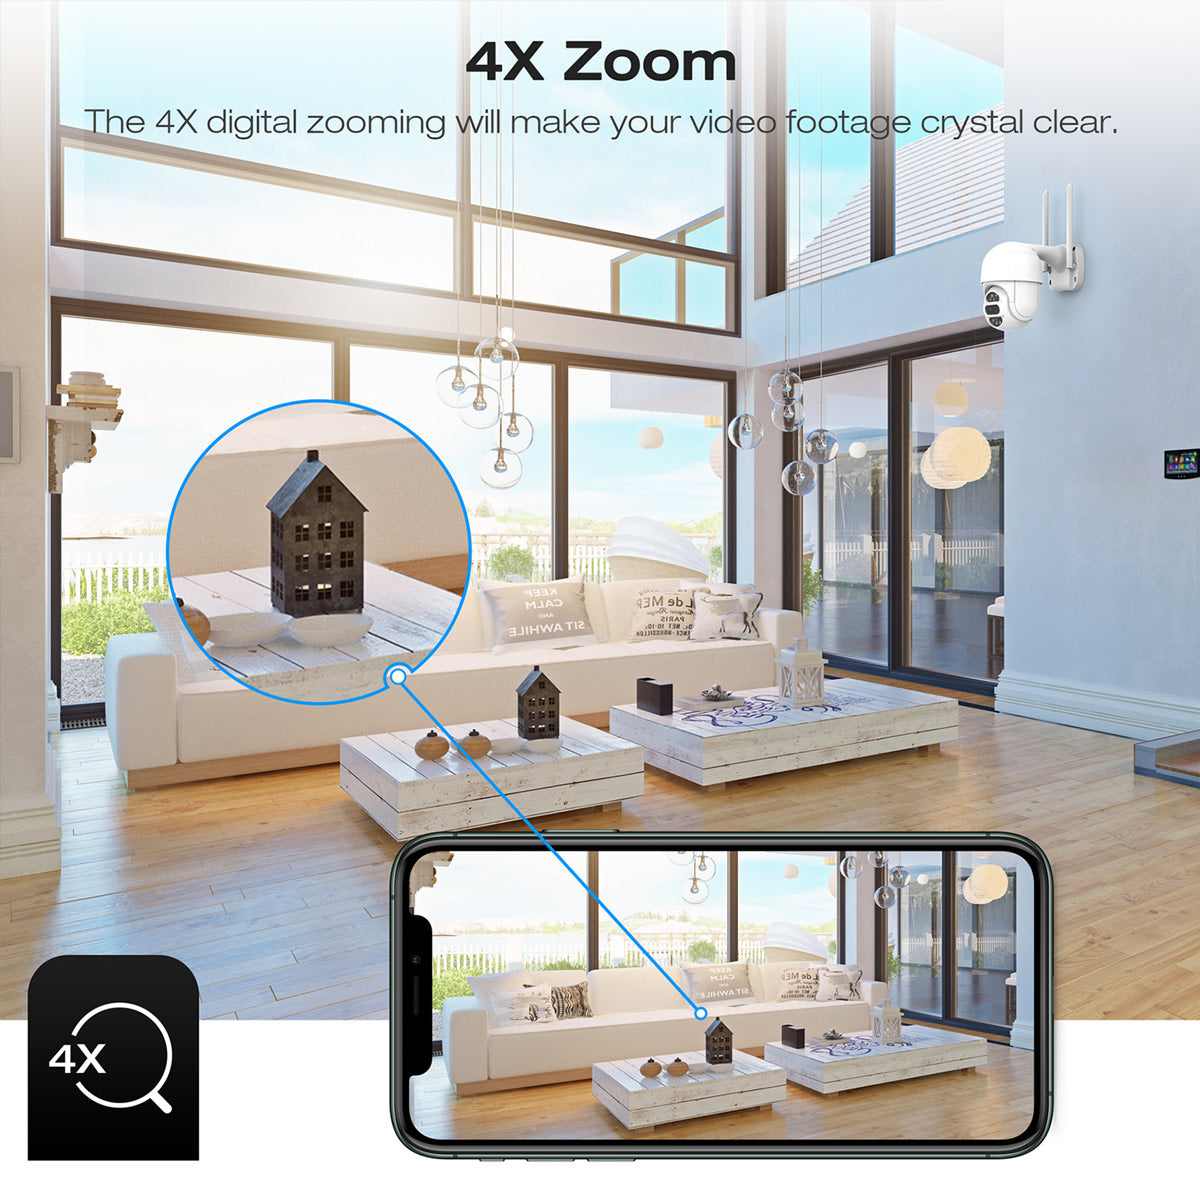 Campark AP30 2MP Color Night Vision & 4x Zoom Dual Lens WiFi PTZ Security Camera(Out Of Stock In Europe)